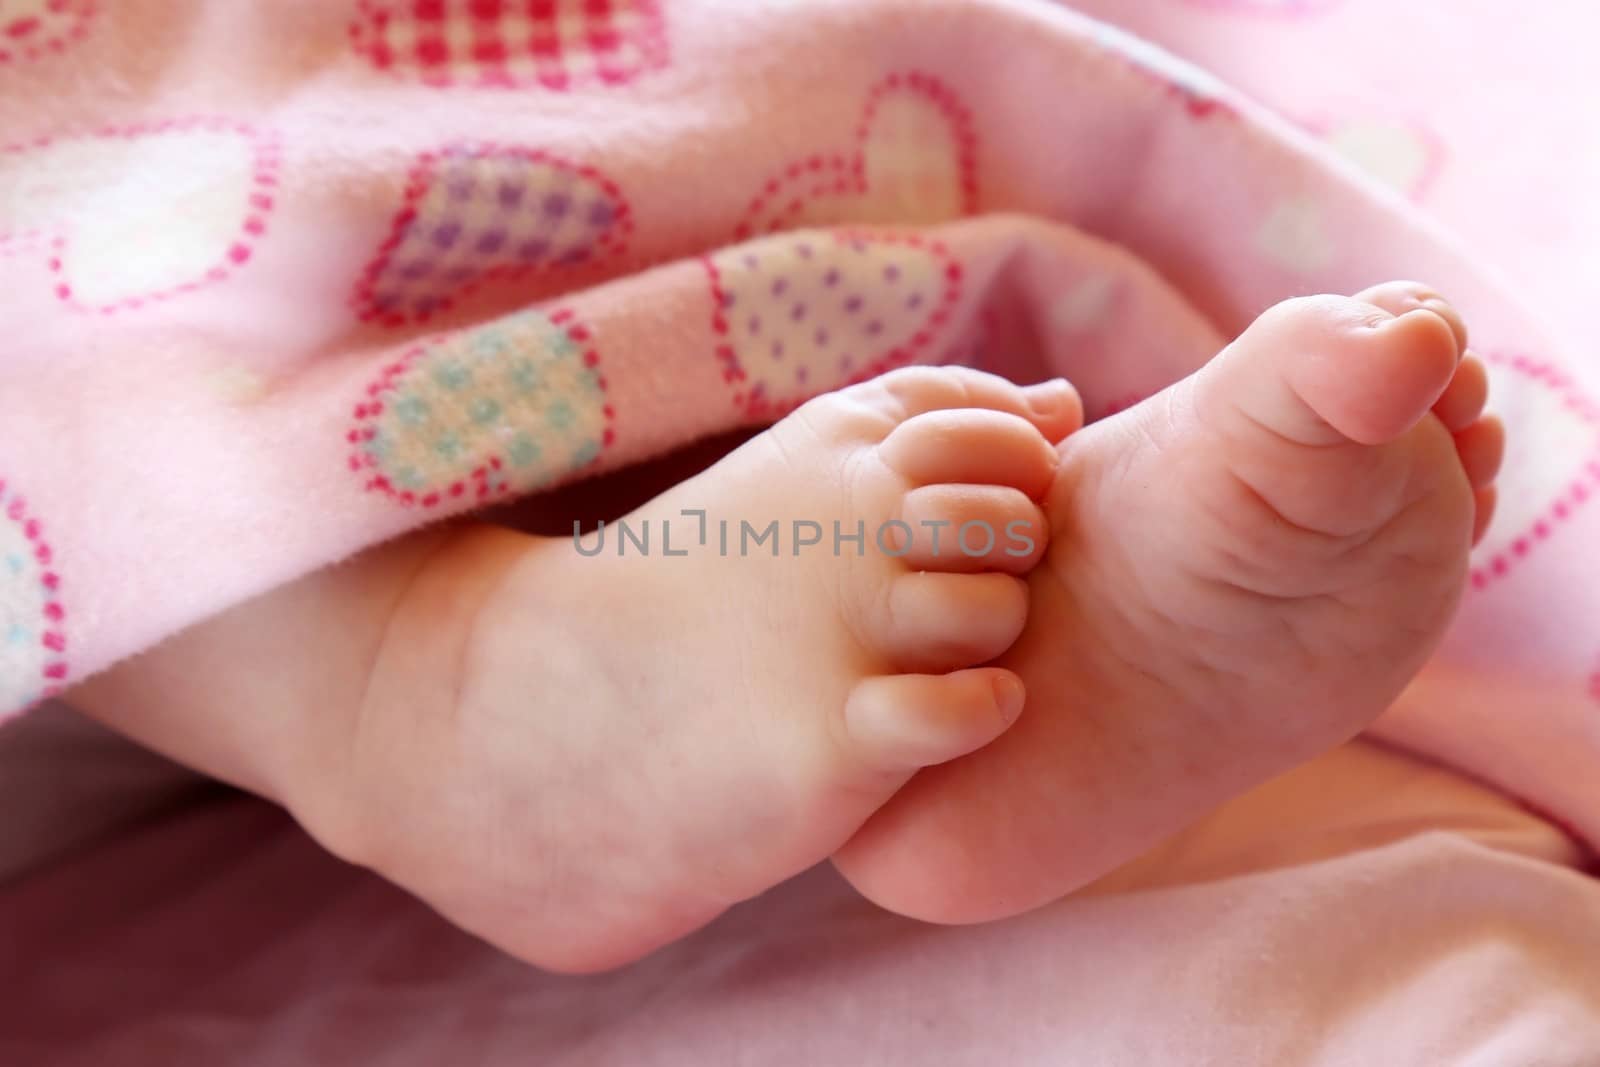 Baby's cute feet against a pink background